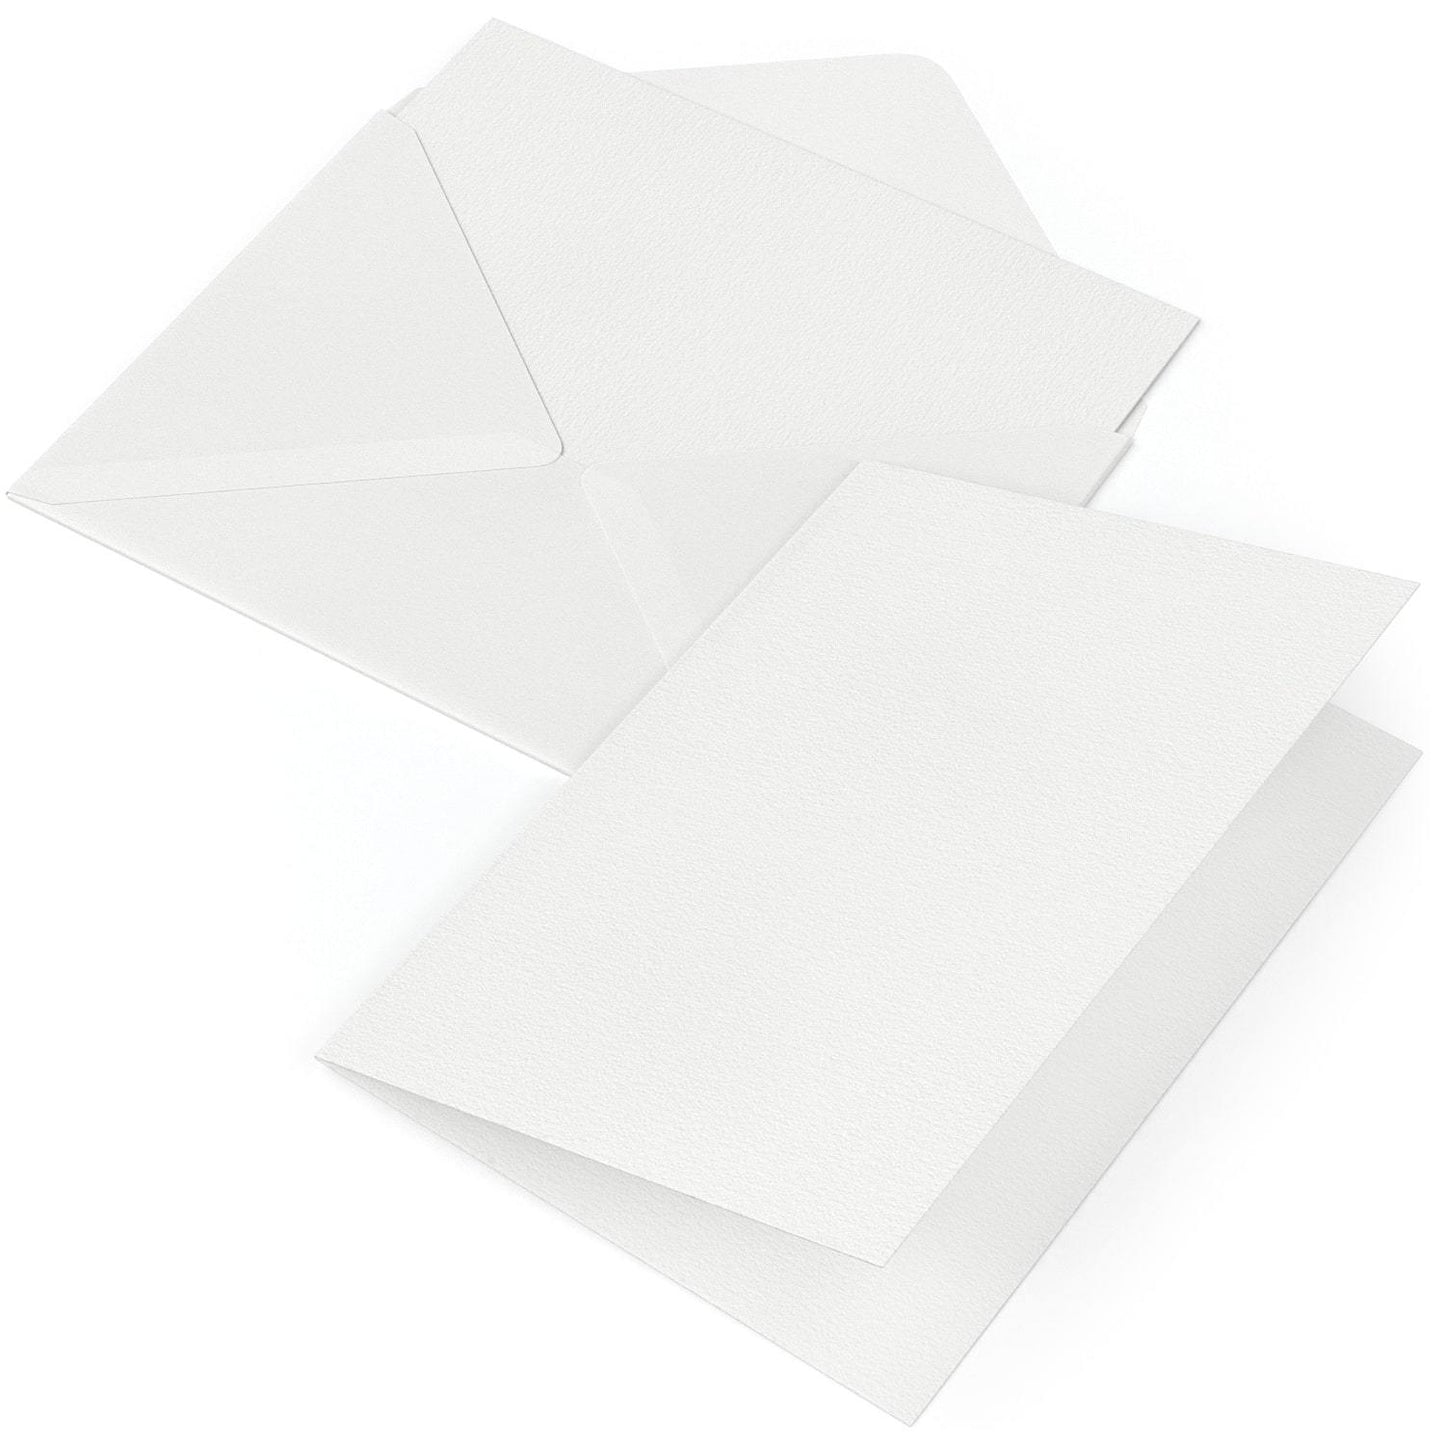 Arteza Blank Watercolor Cards with Envelopes, Set of 25, 5 x 6.9 Inches,  140 lb Heavyweight Paper, 100% Cotton Watercolor Postcards, Art Supplies  for Thank You Notes, Invitations, and Greeting Cards 